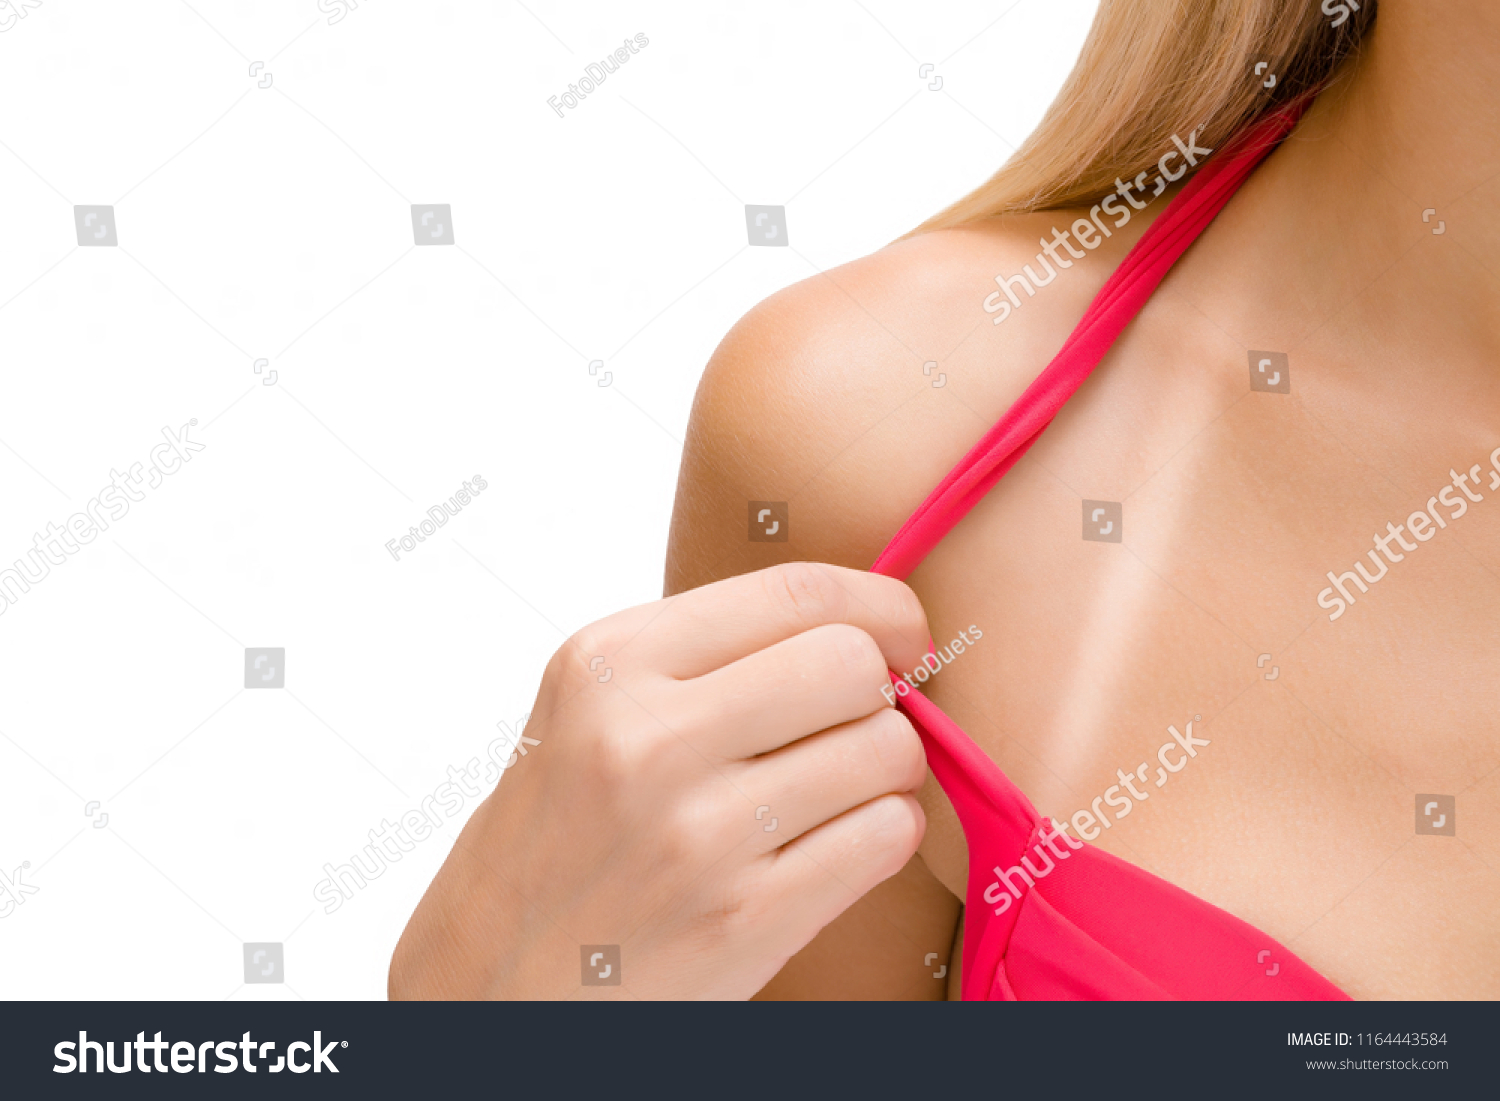 Young woman showing white stripe from swimsuit on shoulder zone after sunburn. Isolated on white background. Skin protection. Sunbathing concept. Front view. Empty place for text. #1164443584